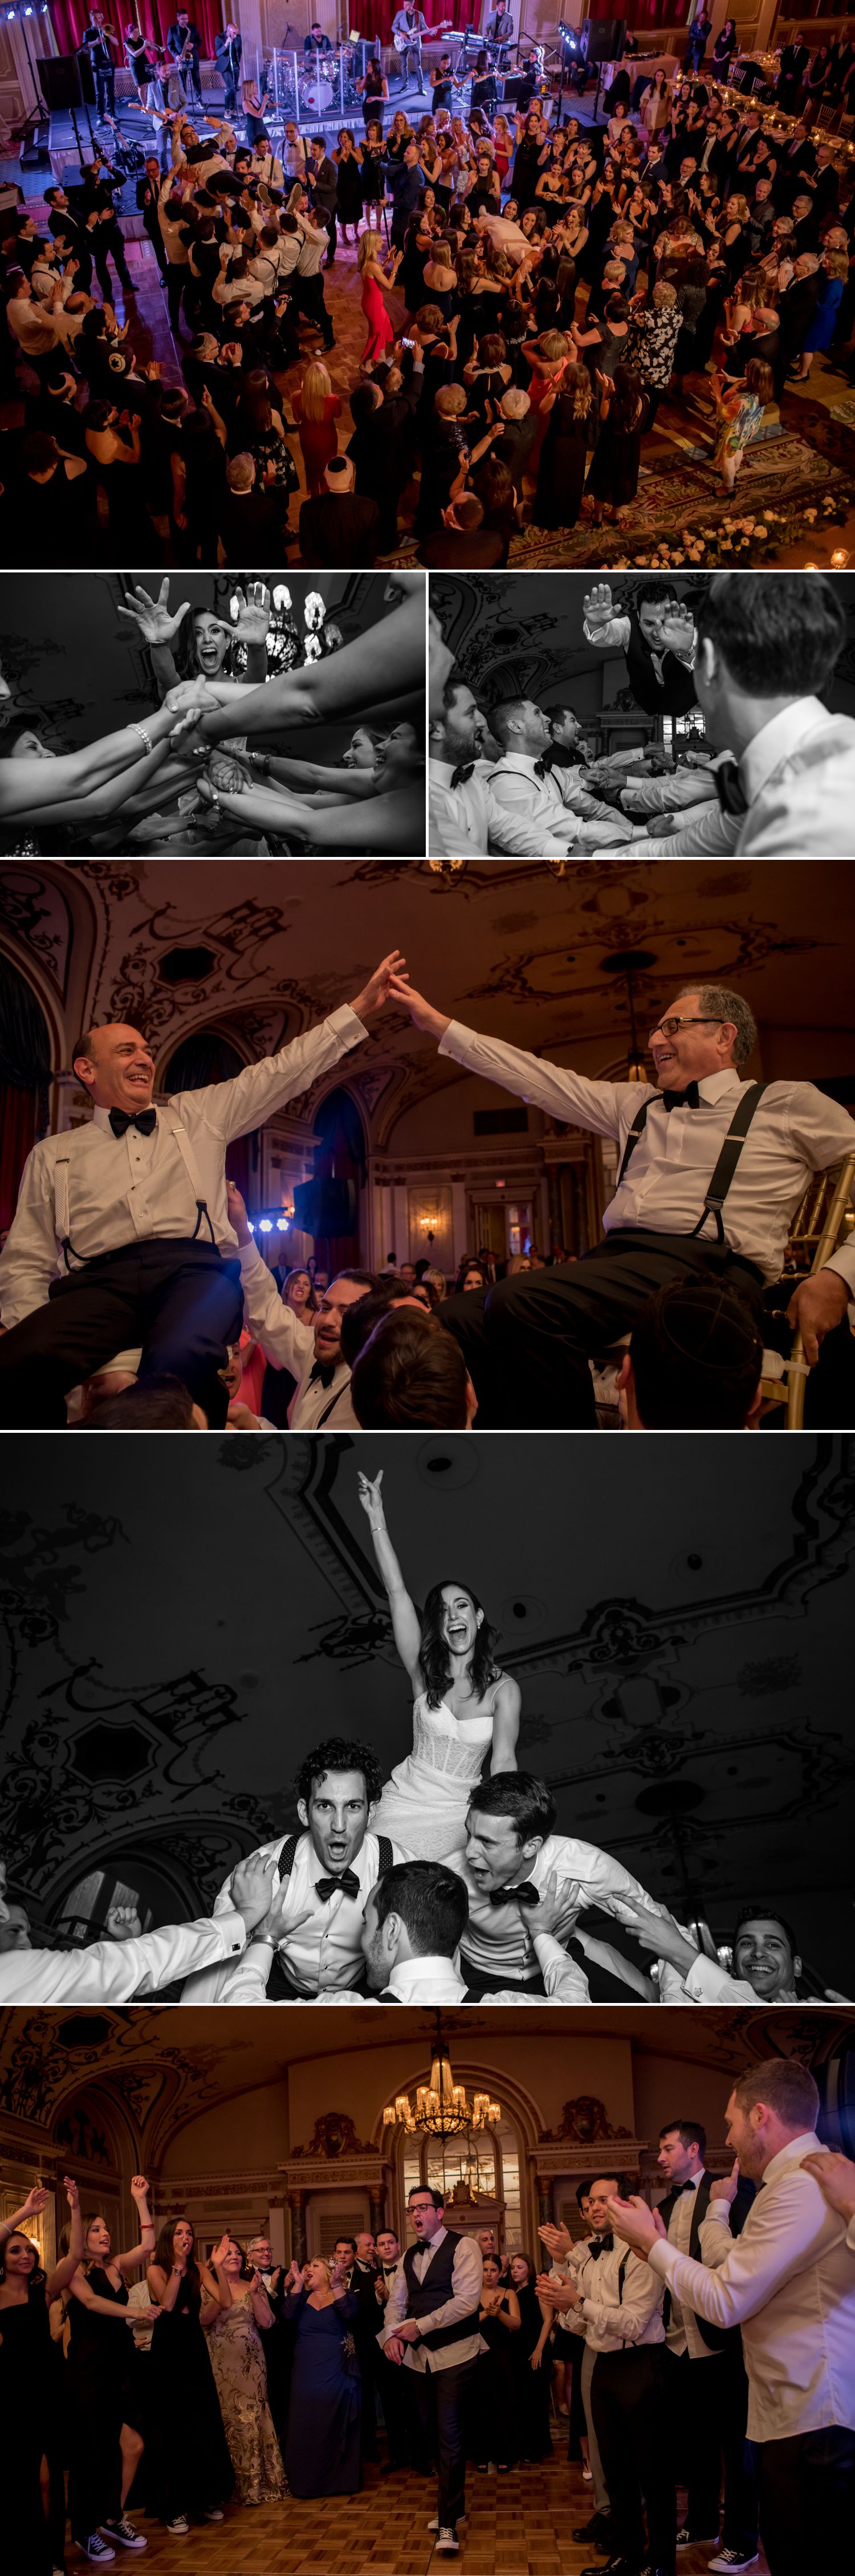 candid moments during horah dance at a jewish wedding in the chateau laurier ballroom in ottawa ontario